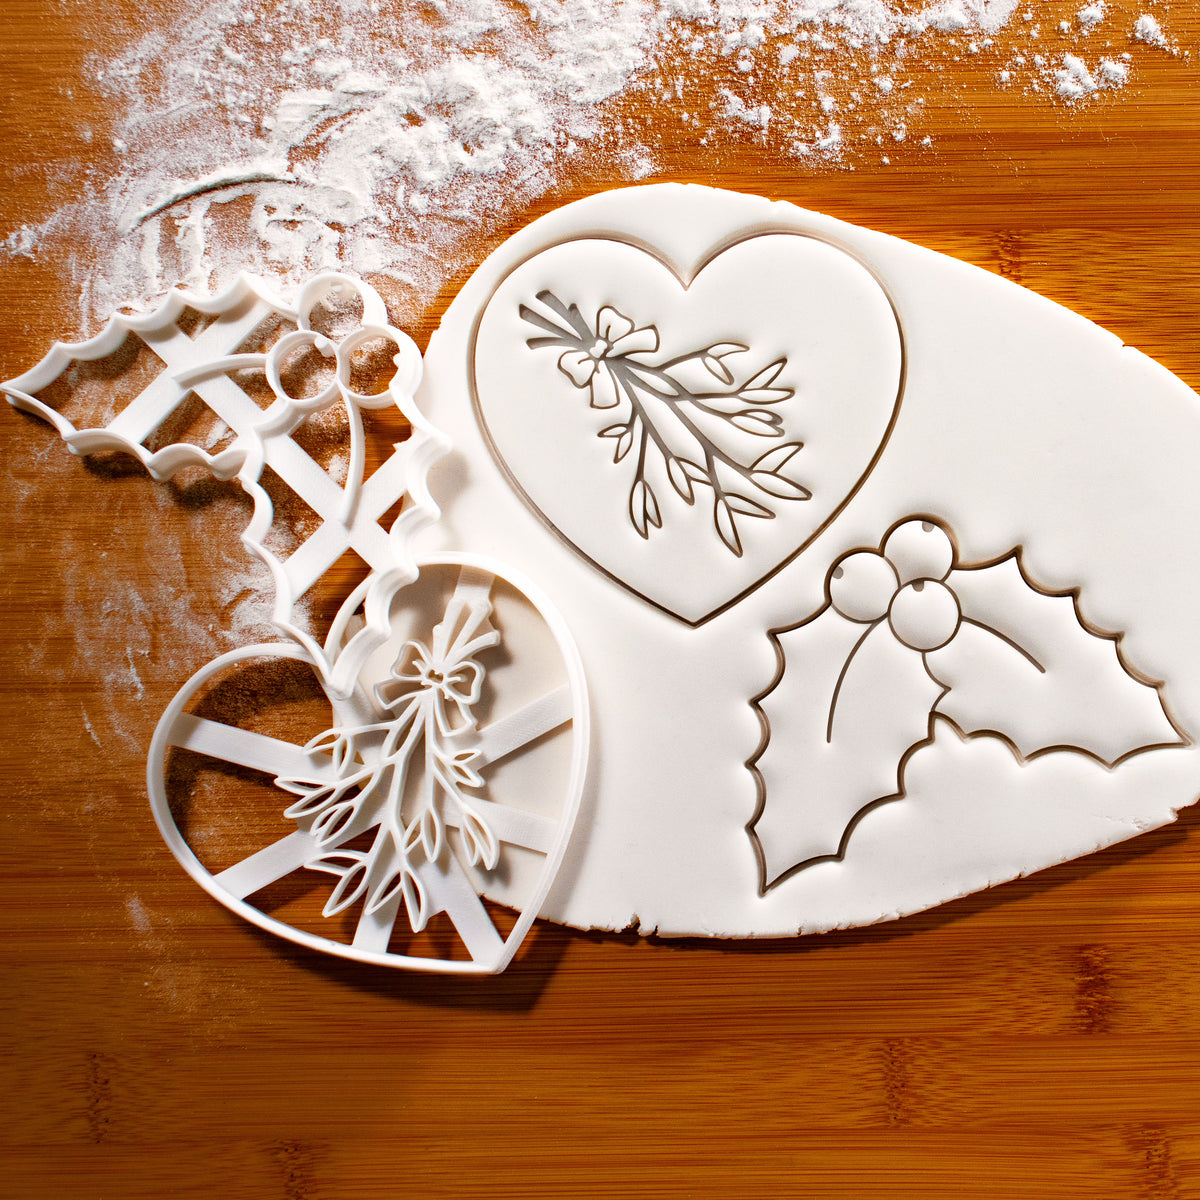 holly and mistletoe cookie cutters